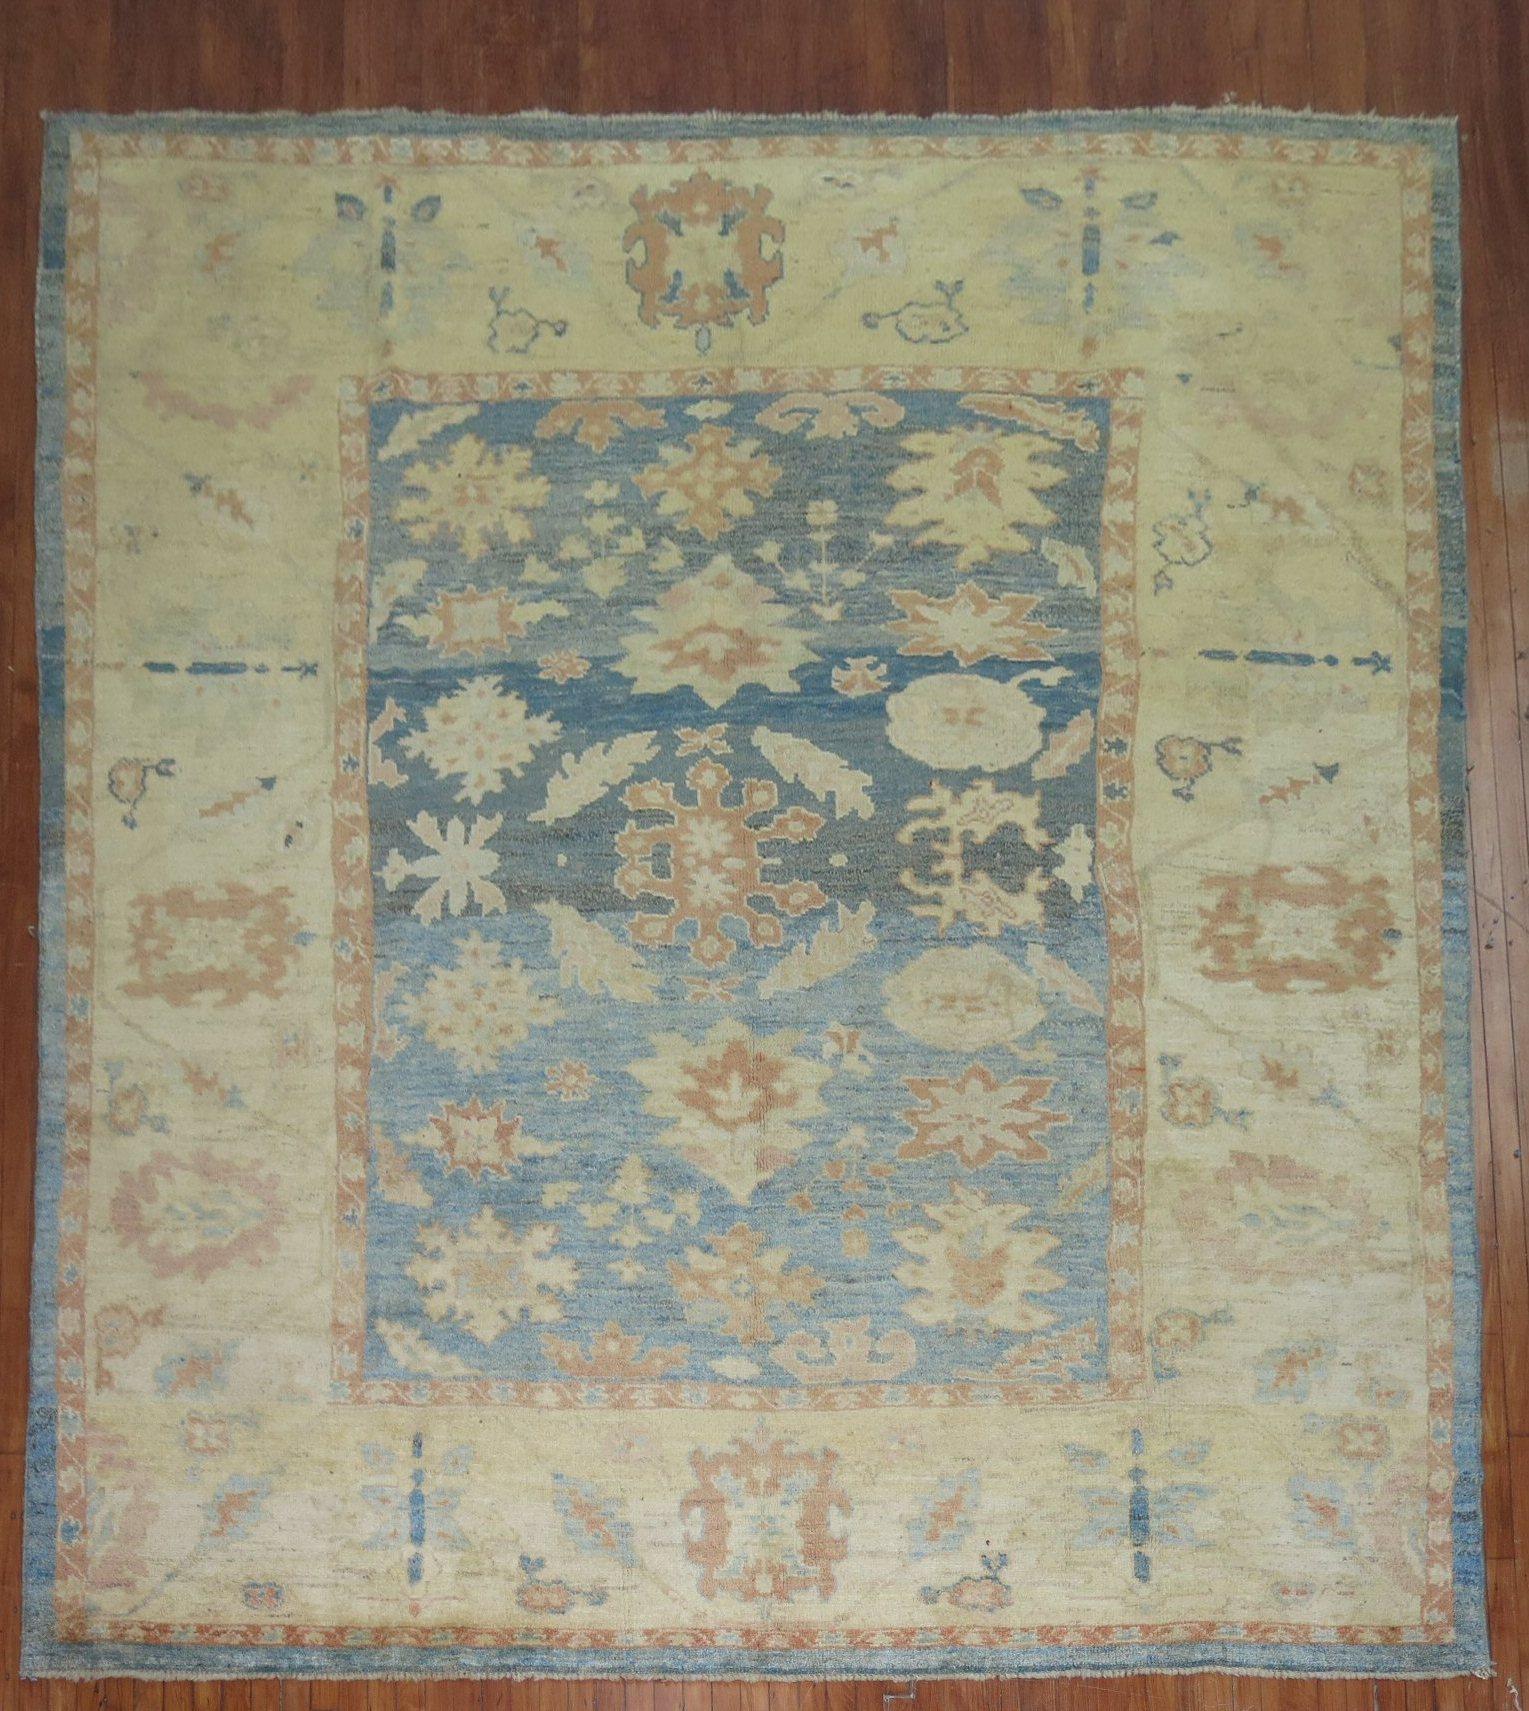 Room size Turkish oushak rug from the 3rd quarter of the 20th century.

Measures: 9'10' x 11'10''.